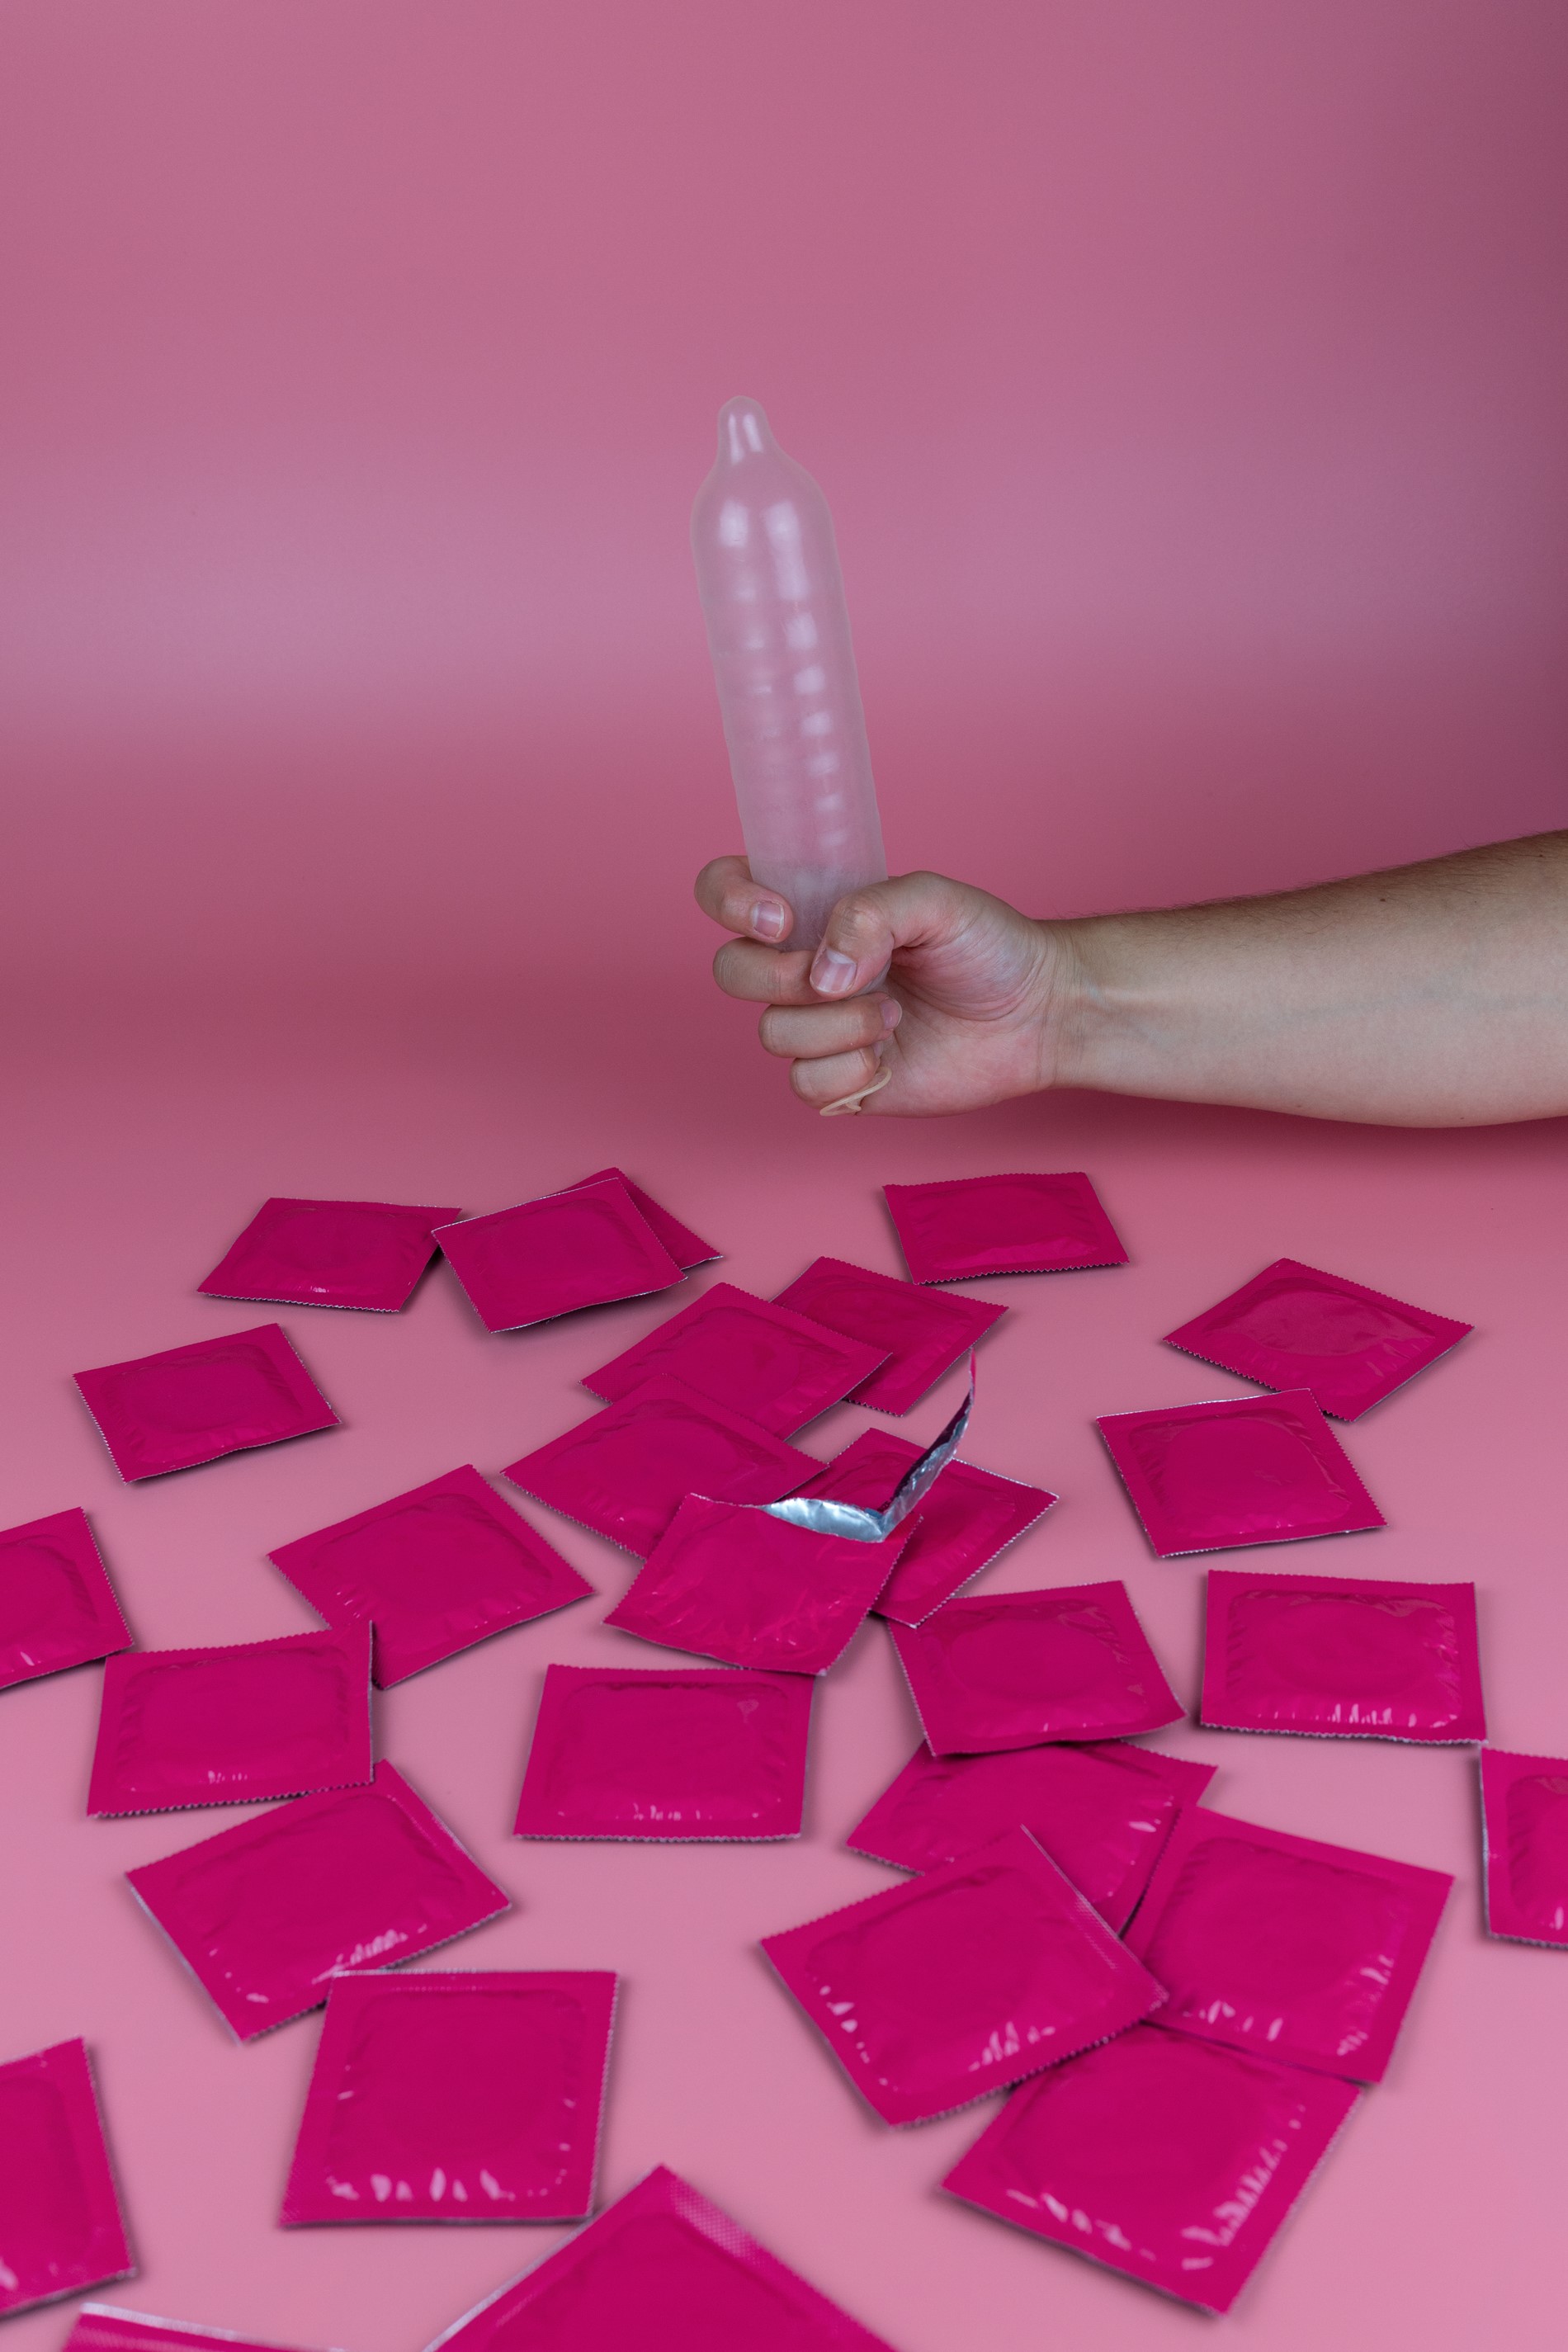 Person holding an inflated condom, surrounded by packets of condoms